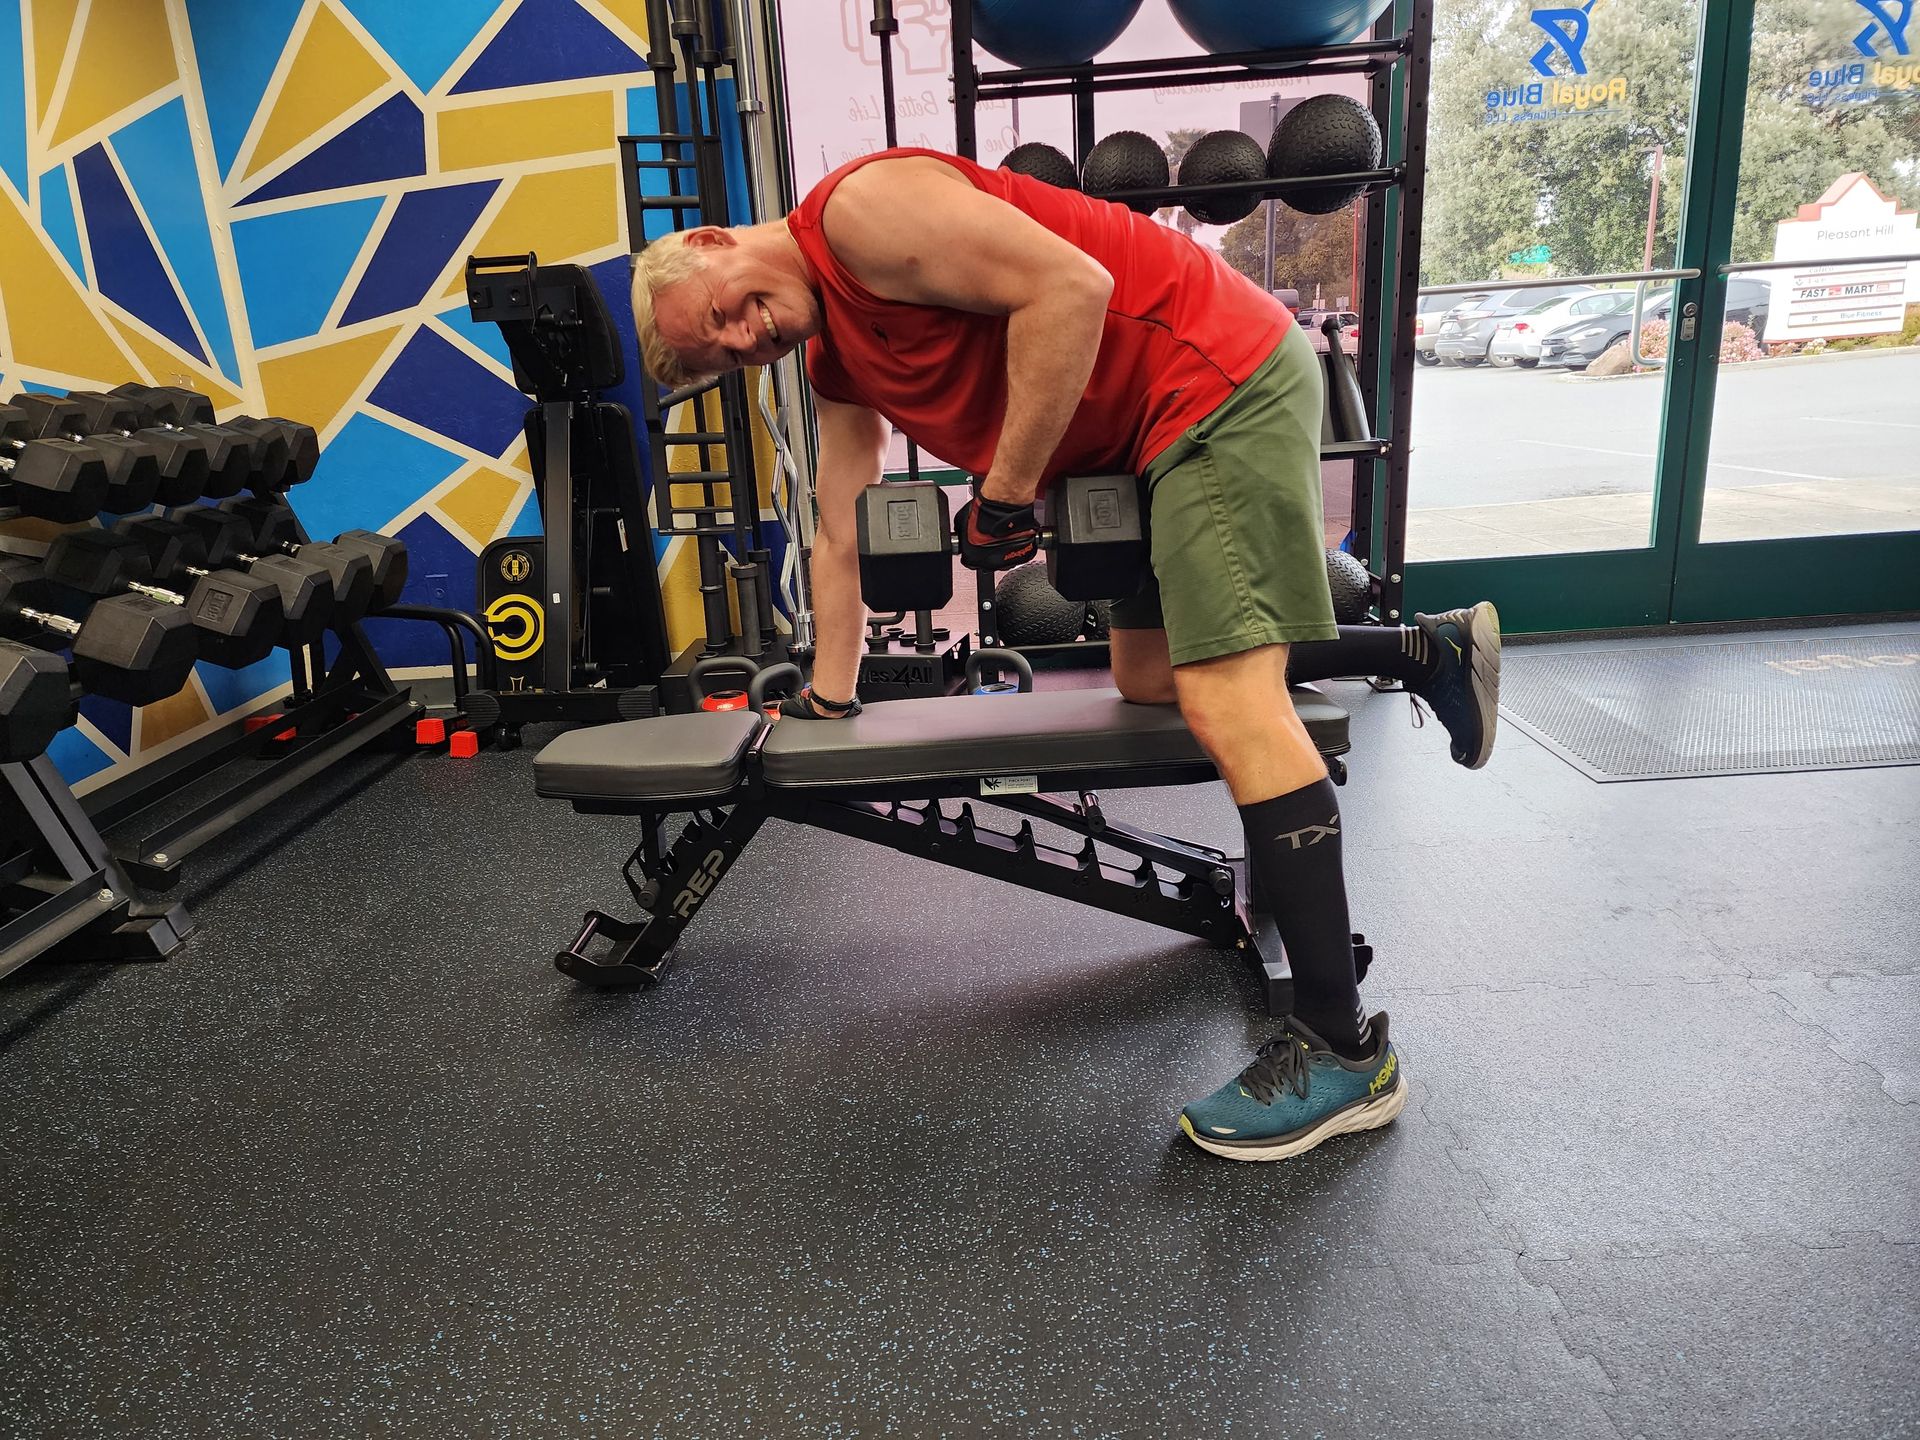 Man in red shirt performing a dumbbell row for strength training with a pleasant smile on his face in a well equipped gym